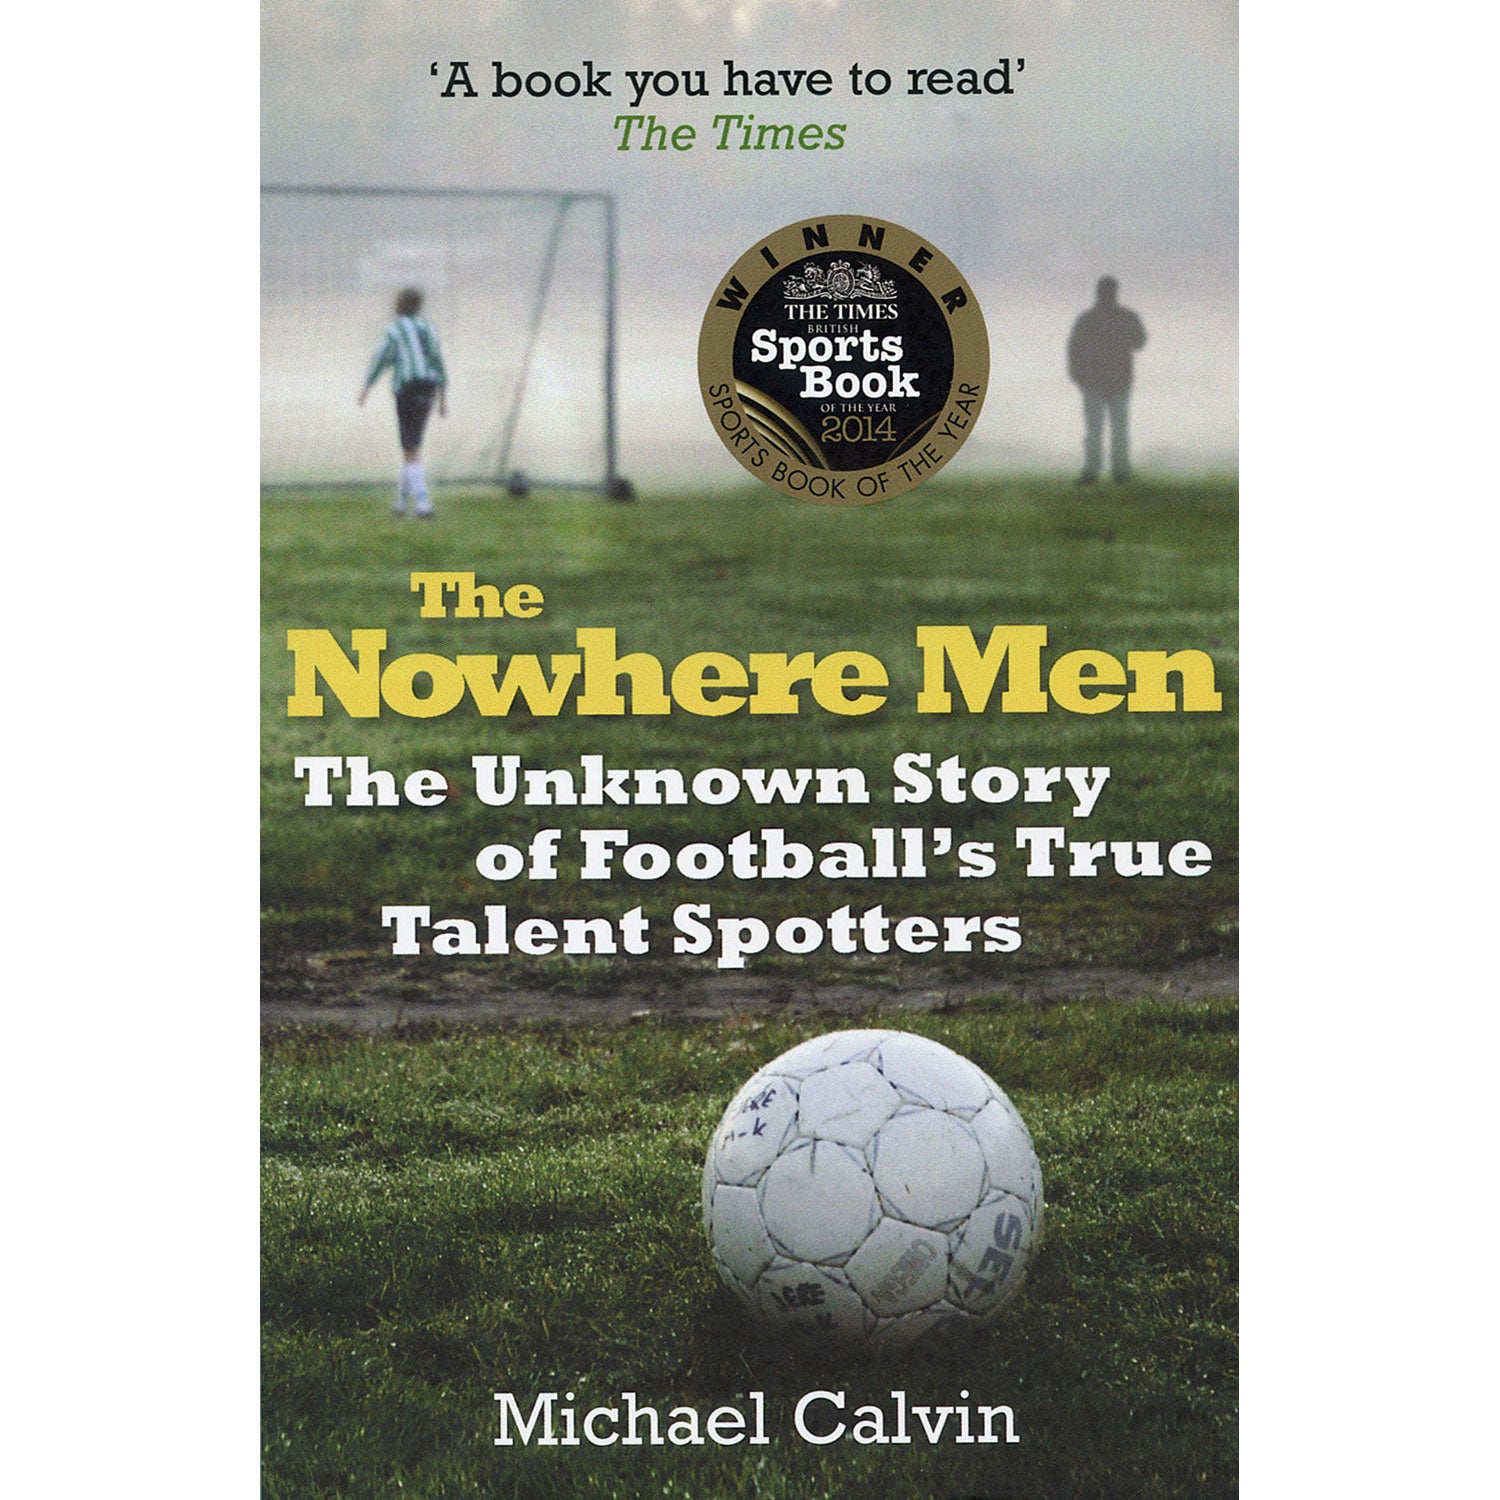 The Nowhere Men – The Unknown Story of Football's True Talent Spotters